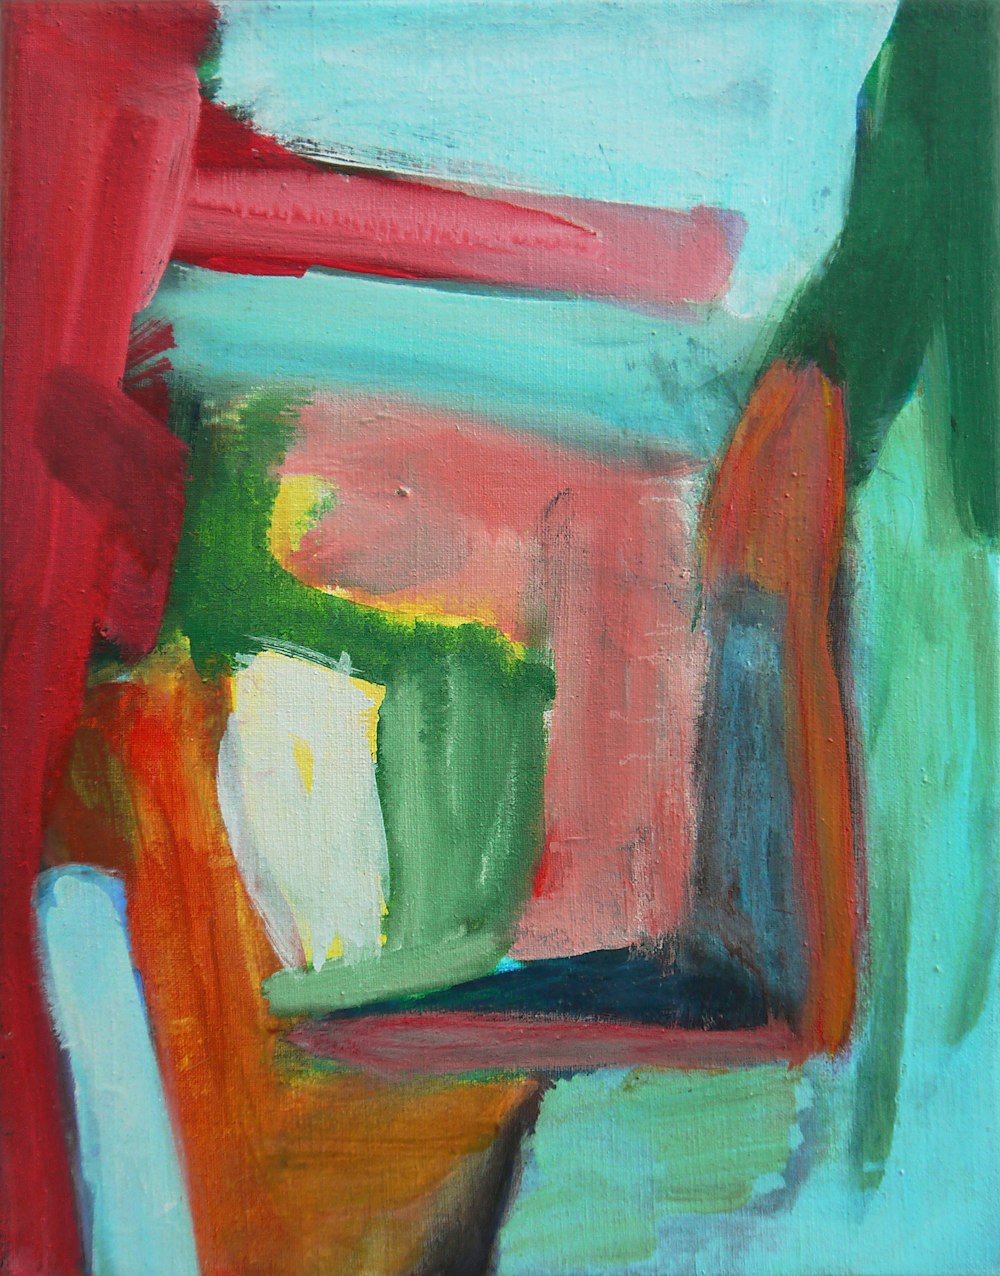 a painting of a red, green, blue, and yellow abstract painting